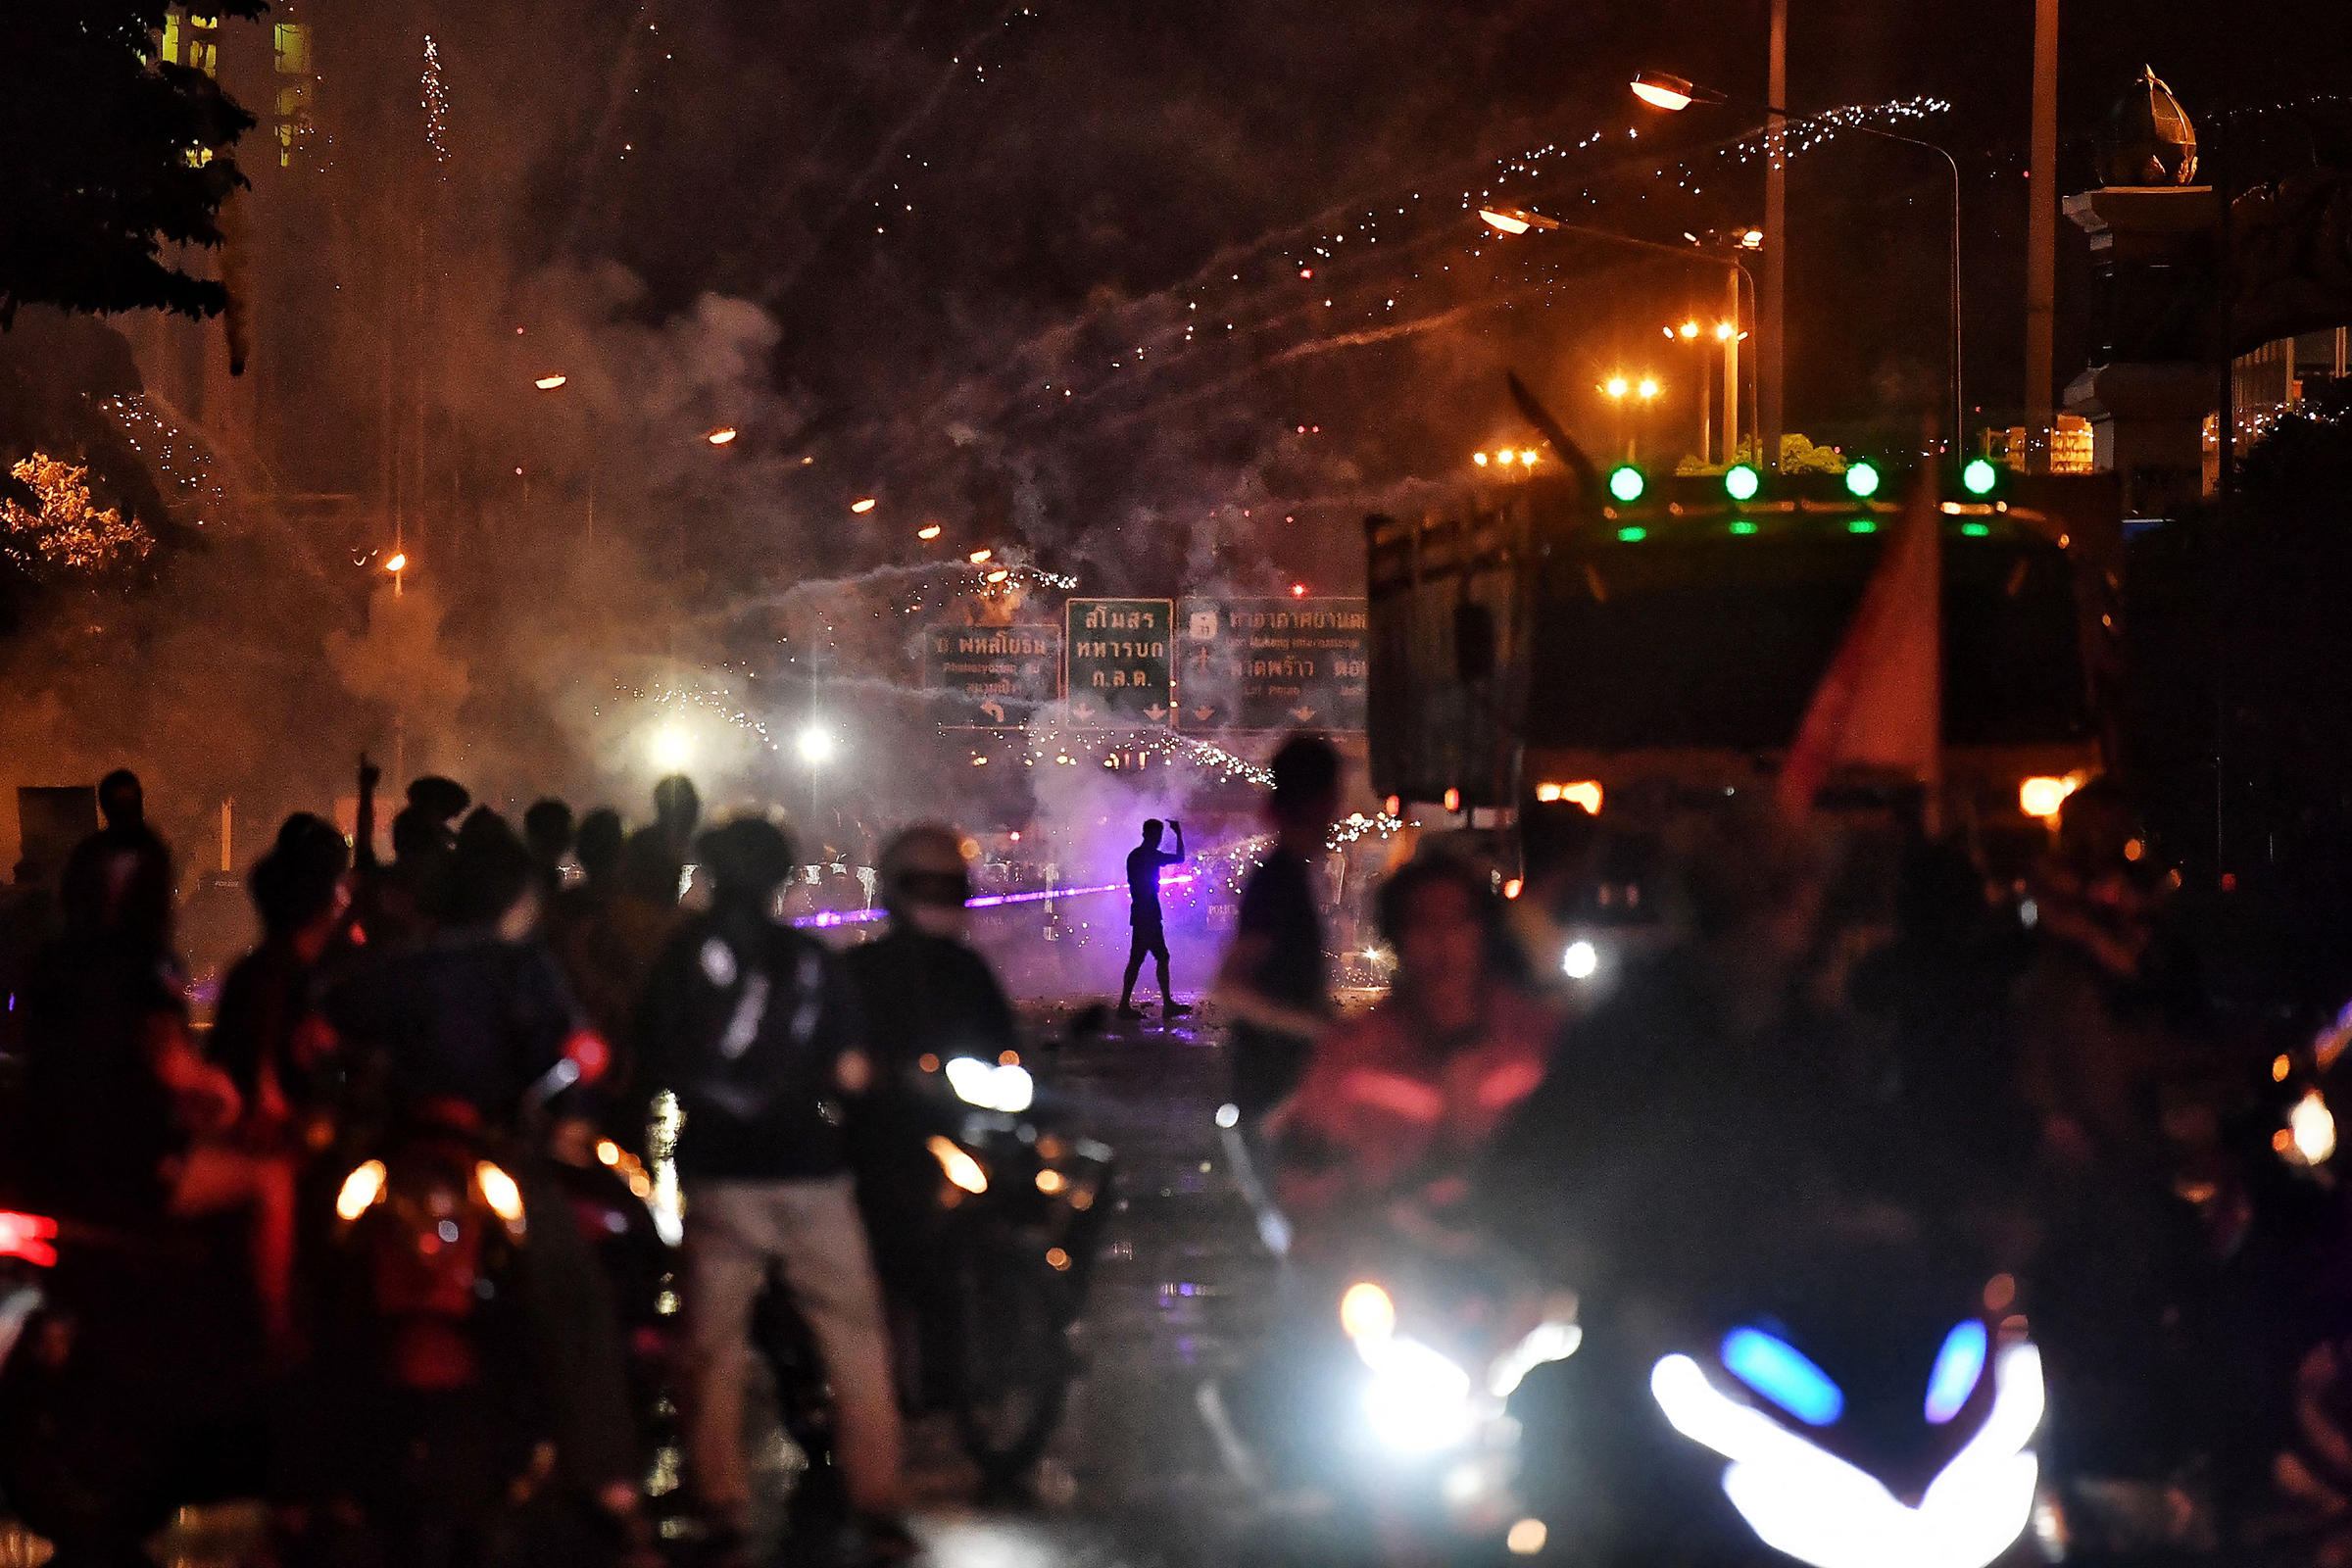 Anti-government protesters set off firecrackers near riot police during a demonstration calling for the Thai Prime Minister's resignation over the government's coronavirus response in Bangkok on Sept. 5.